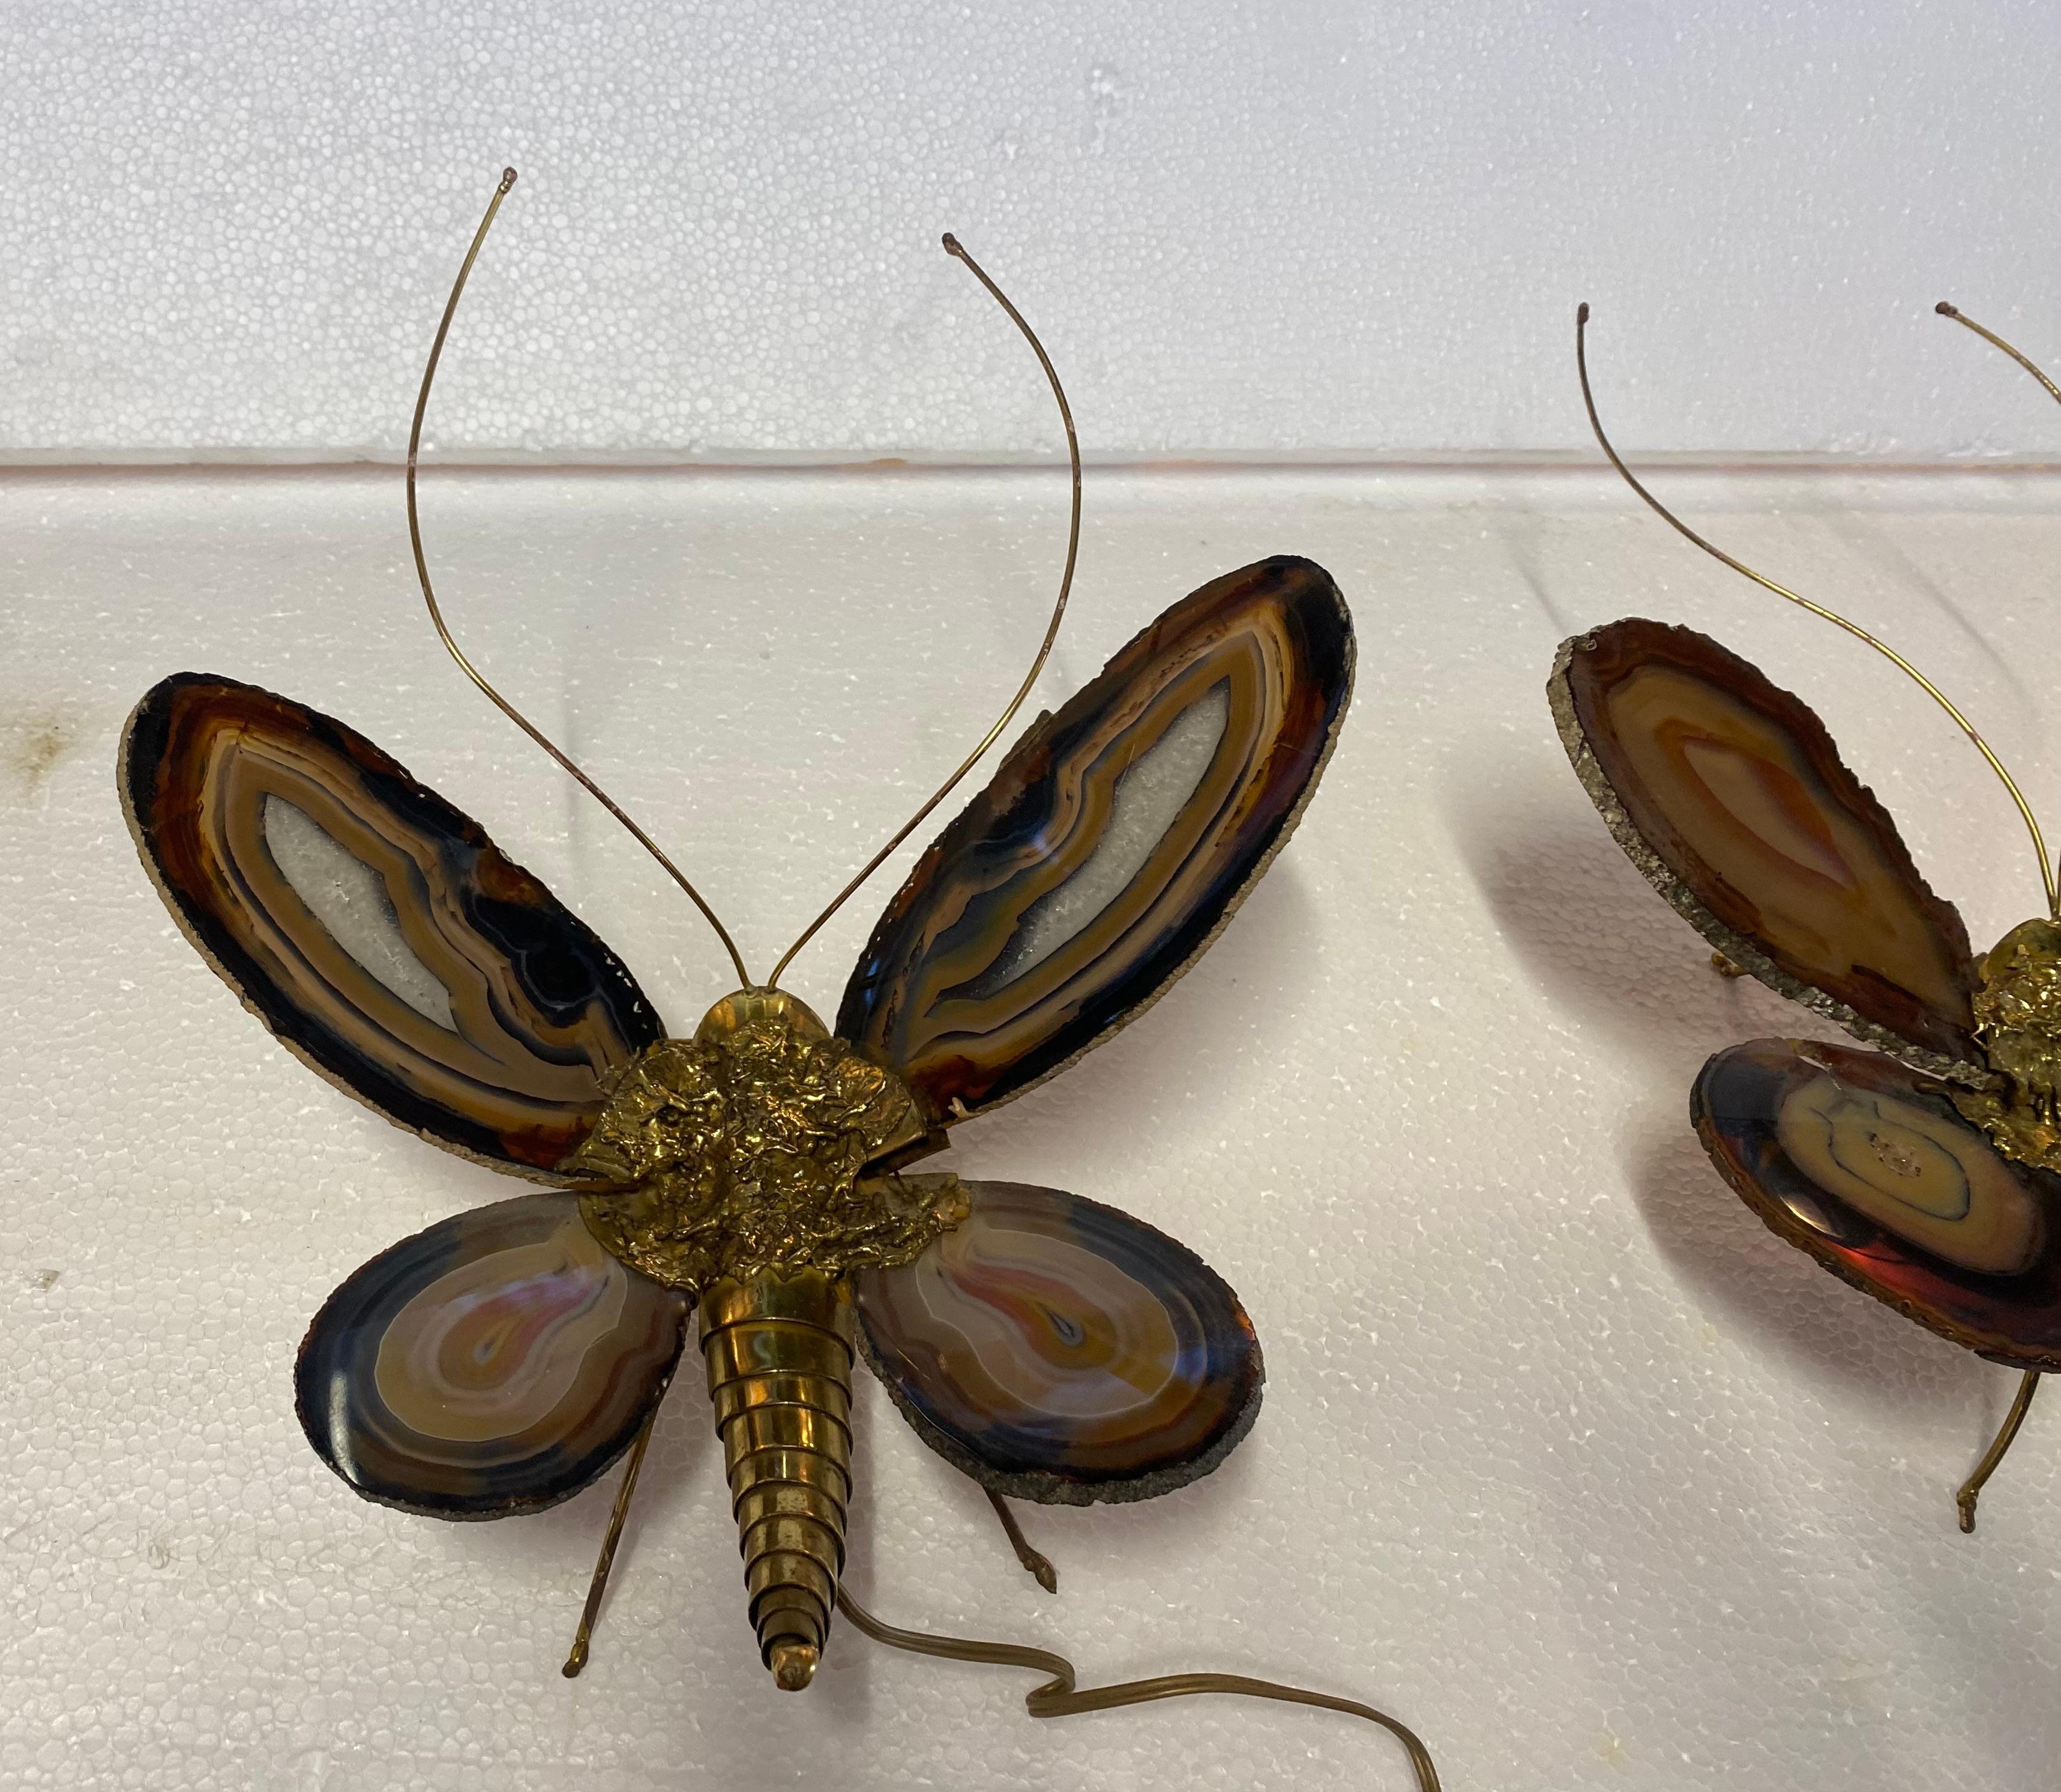 Pair of butterfly wall lights in bronze or brass, 1 bulb, agate wings, good condition, circa 1970
Wing height: 20 cm
Width: 33 cm
Height: 40 cm
Depth: 13 cm